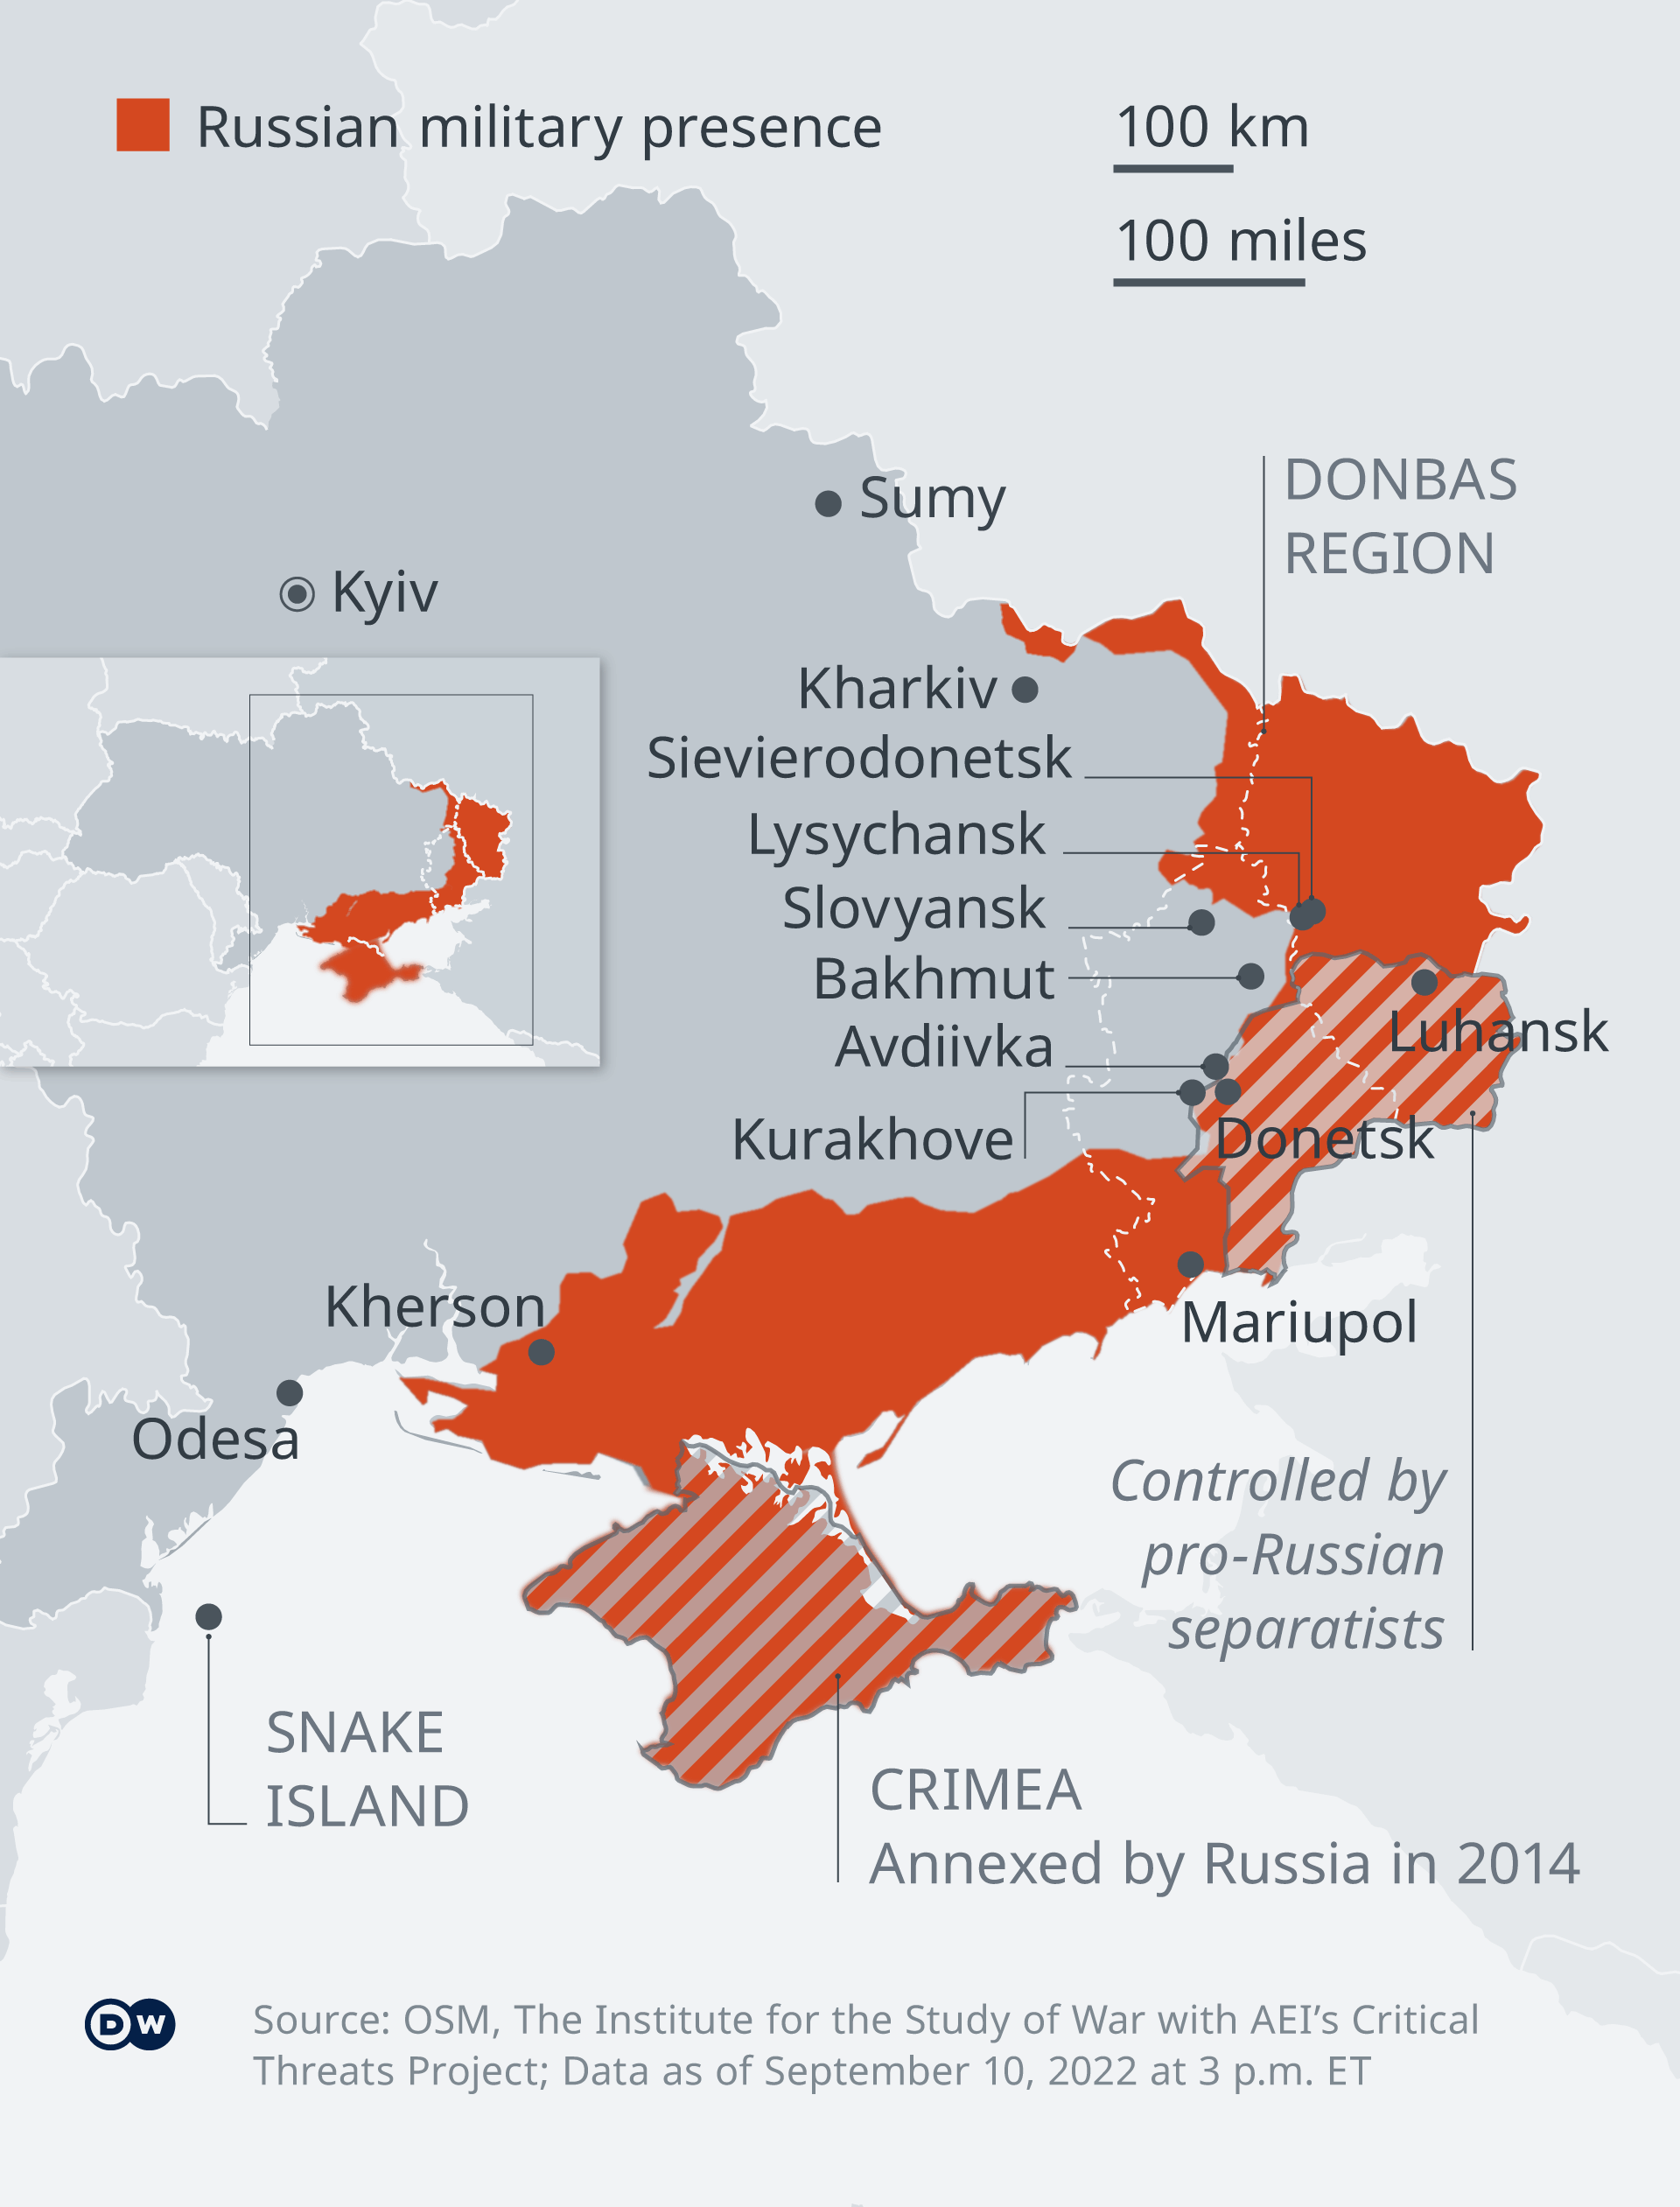 Map of Ukraine, with red shading in the east and south, indicating areas occupied by Russia or controlled by pro-Russian separatists